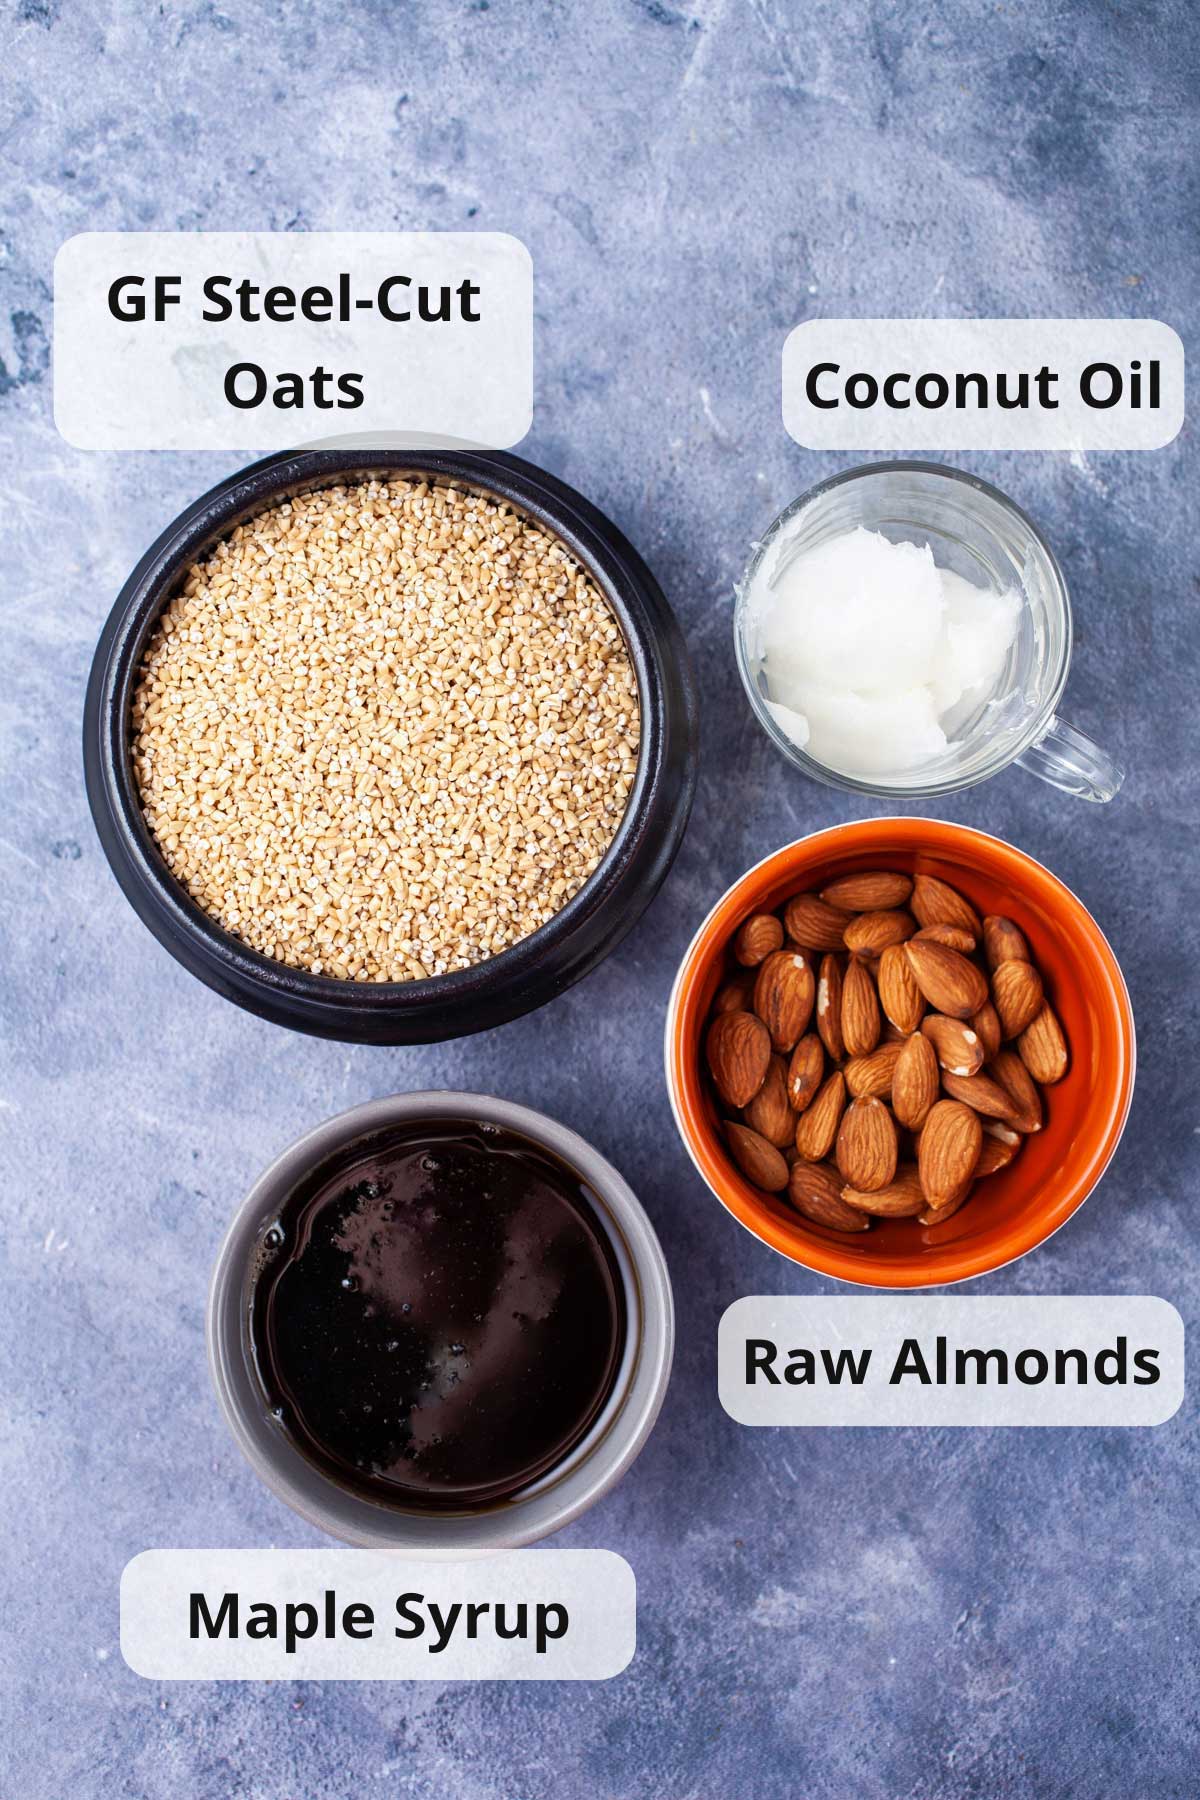 Gluten-free steel cut oats, coconut oil, maple syrup, and raw almonds displayed on a table.